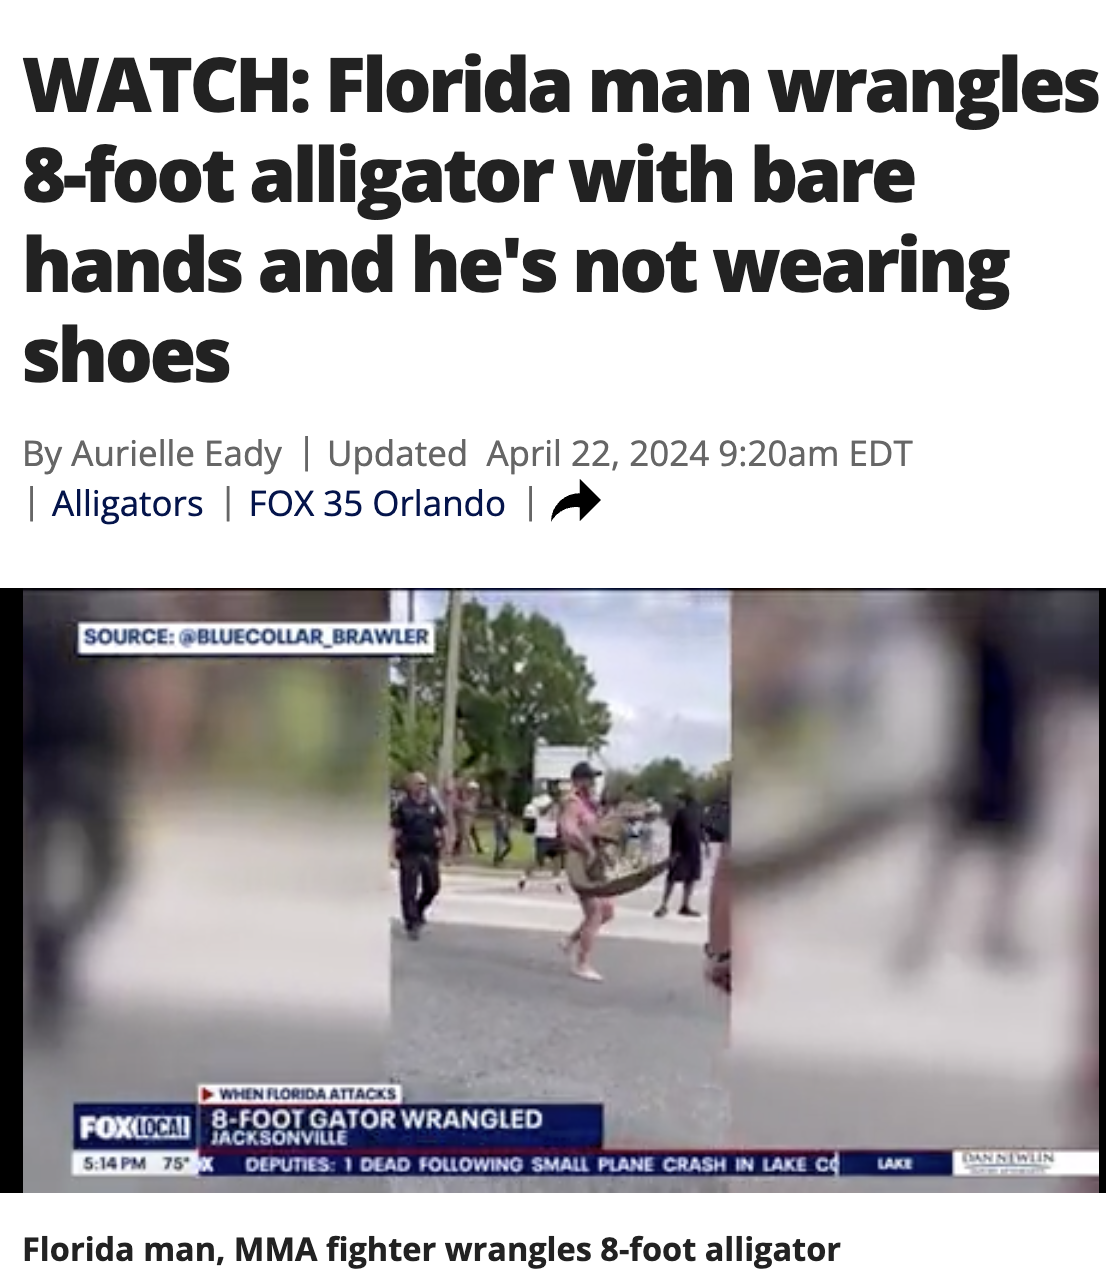 walking - Watch Florida man wrangles 8foot alligator with bare hands and he's not wearing shoes By Aurielle Eady | Updated am Edt Alligators | Fox 35 Orlando | Source Bluecollar Brawler When Florida Attacks FoxFoot Gator Wrangled Jacksonville Deputies 1 D